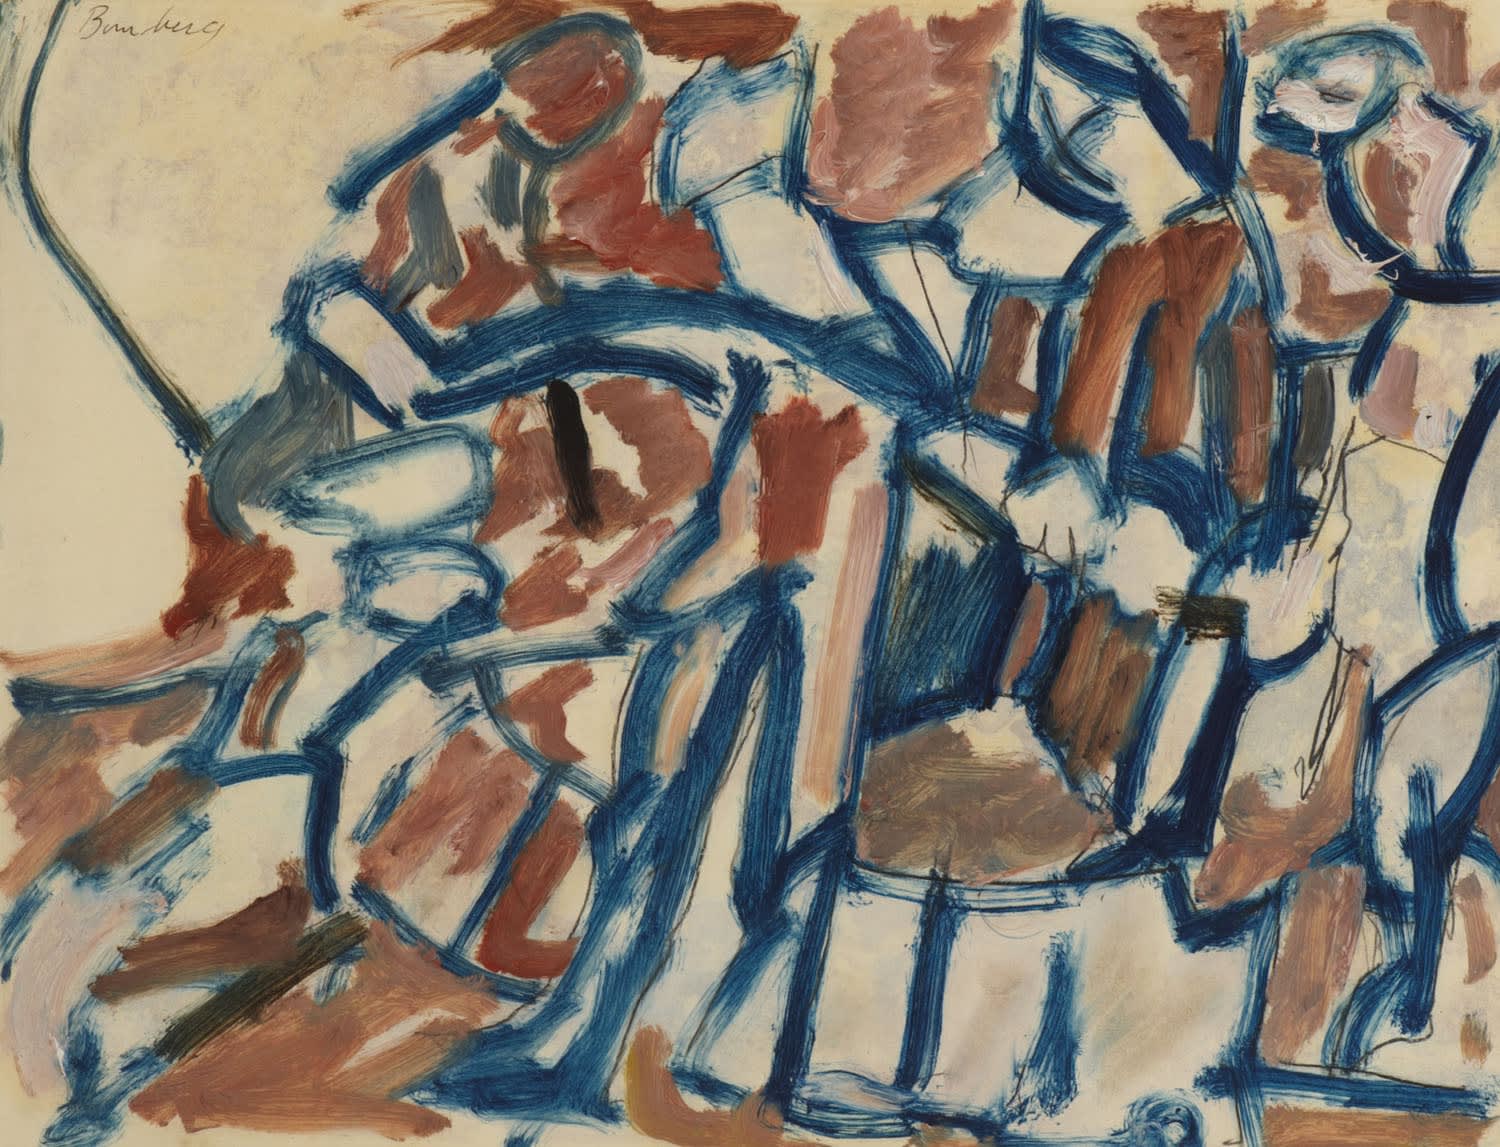 David Bomberg (1890-1957) Ghetto Theatre Study c.1920 Oil and pencil on paper on board 31 x 41.5 cm Ben Uri Collection © David Bomberg estate To see and discover more about this artist click here